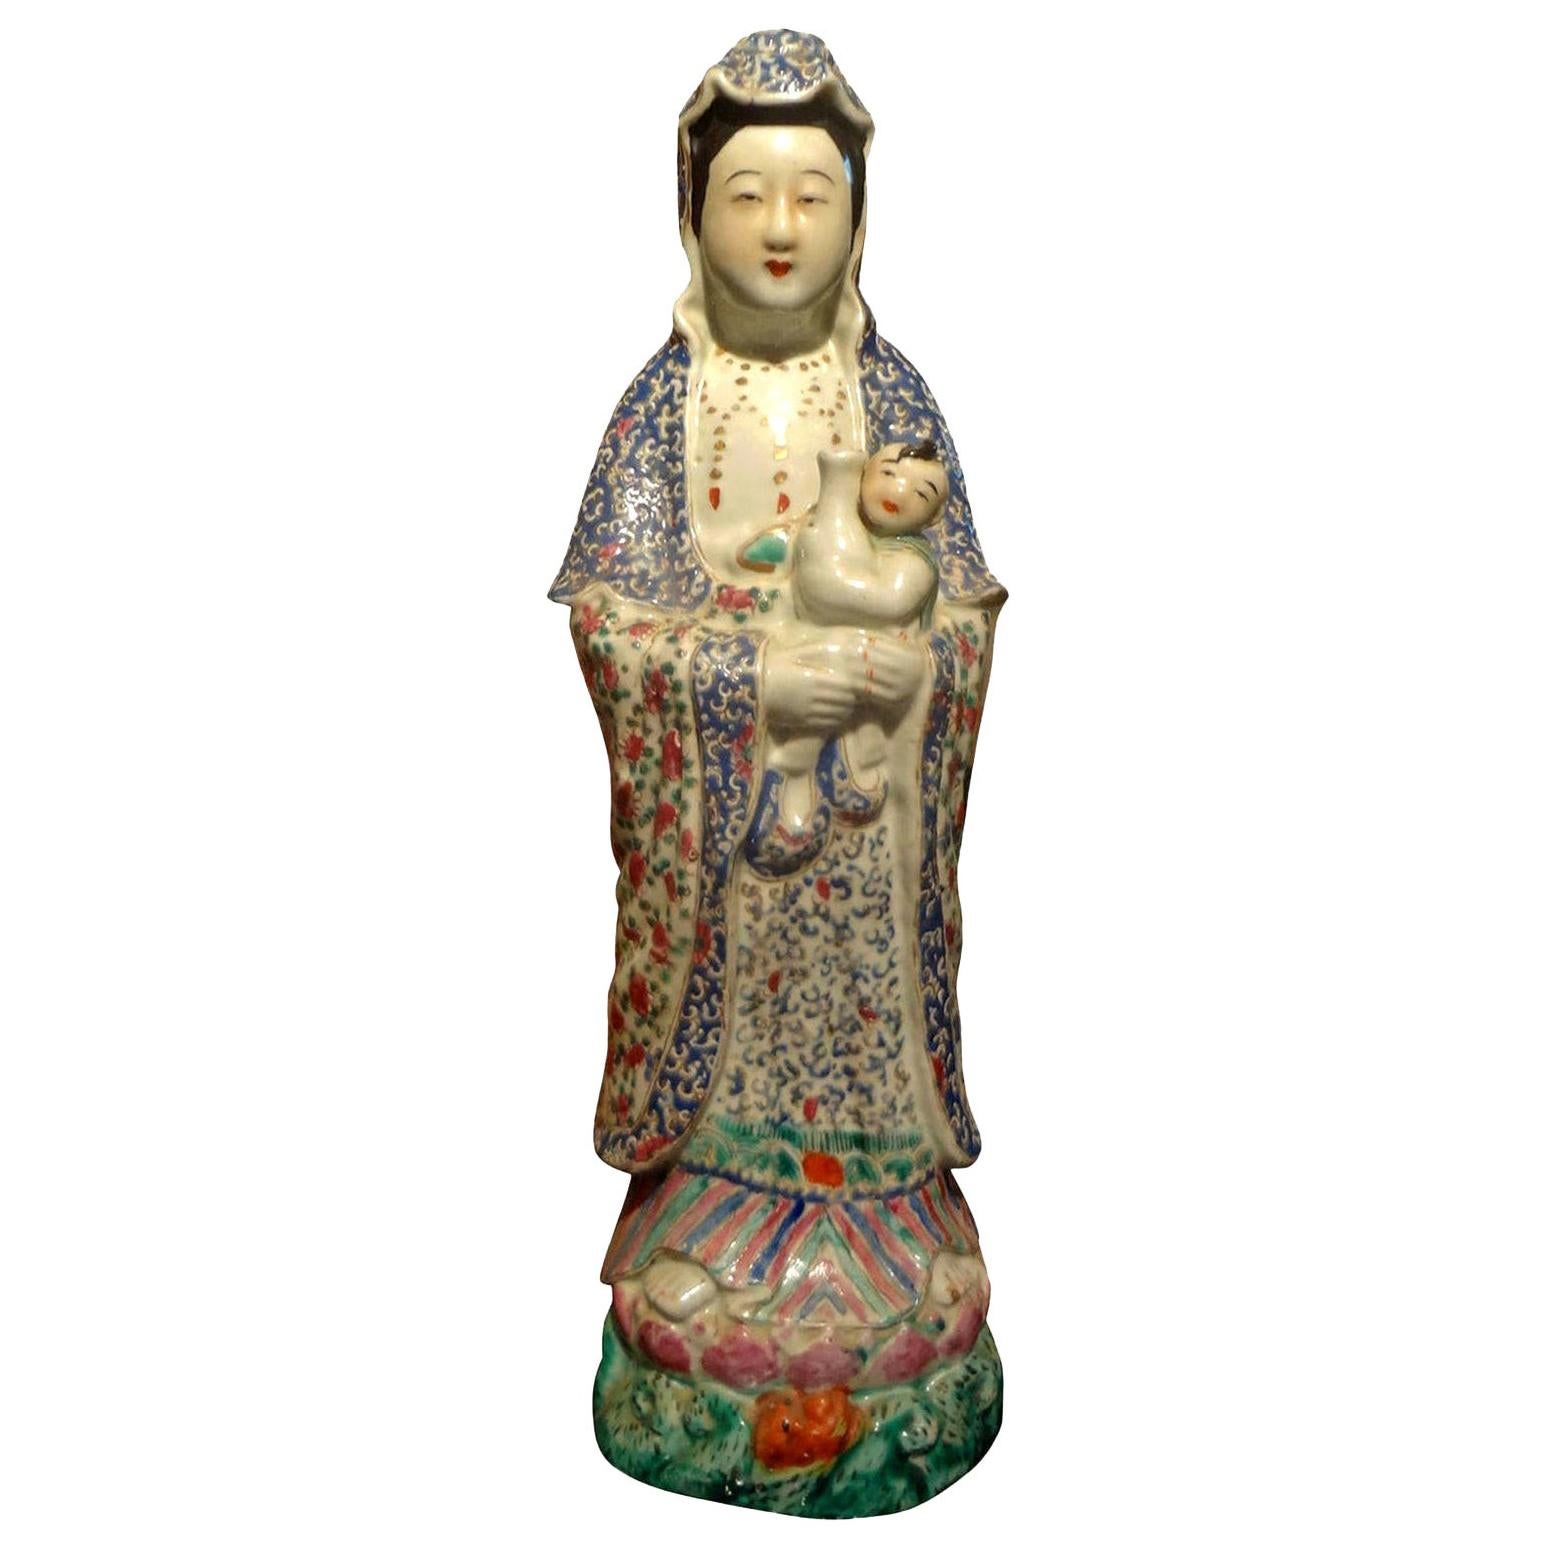 Late 19th-early 20th century Chinese hand decorated porcelain figure.
Beautifully hand decorated Chinese porcelain figure. This stunning colorful finely detailed figurine or sculpture dates from the late 19th-early 20th century.